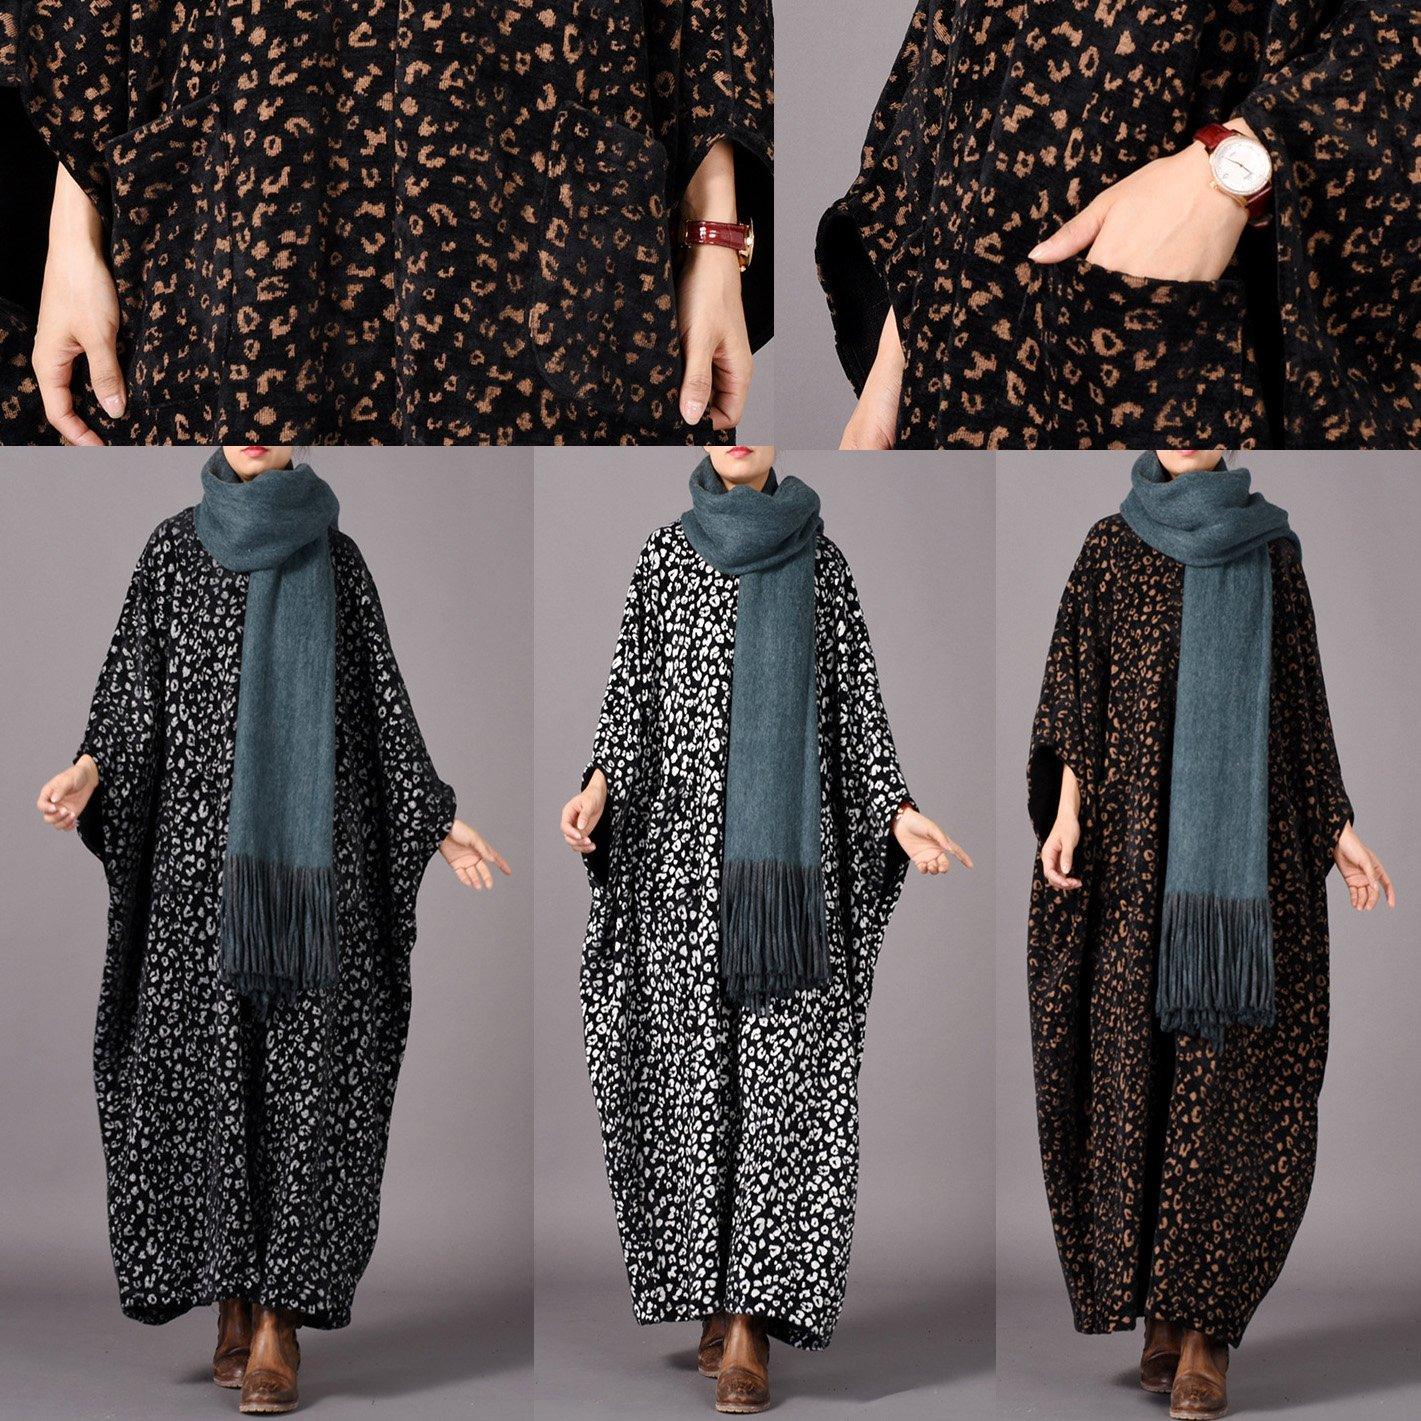 Buy quilting dresses 2019 o neck Batwing Sleeve Online Shopping black floral long Dresses - Omychic